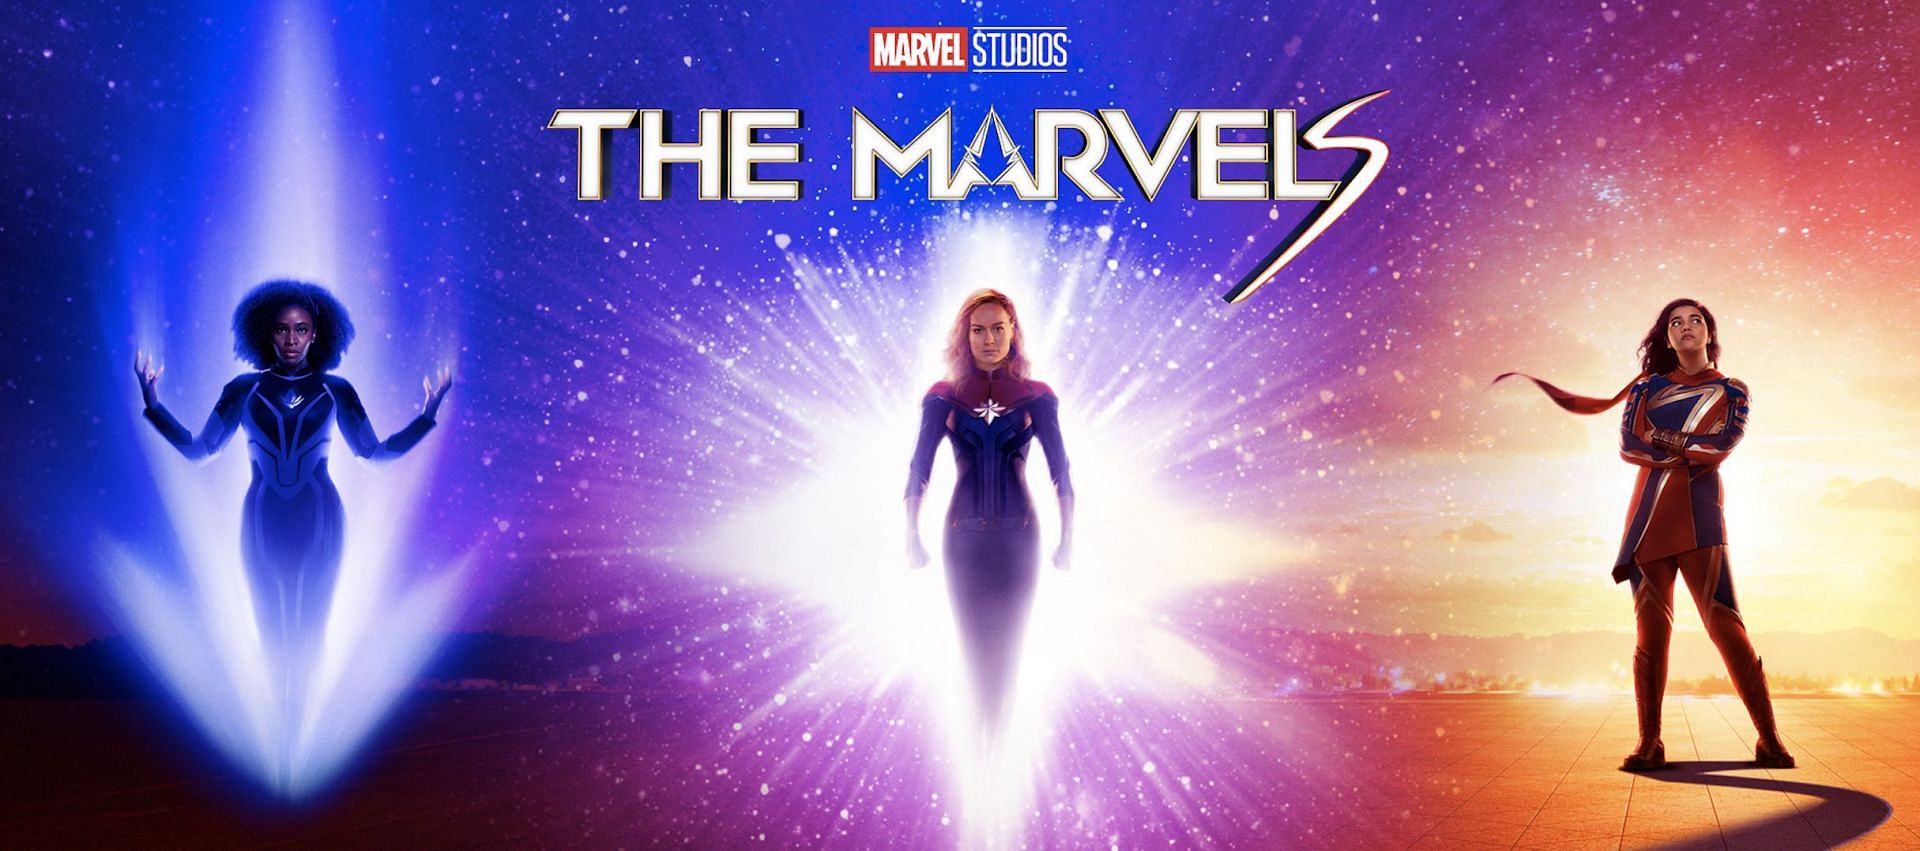 Get ready for action! Meet the powerhouse cast of The Marvels - the highly-anticipated sequel to Captain Marvel featuring your favorite superheroes and villains (Image via Marvel Studios)